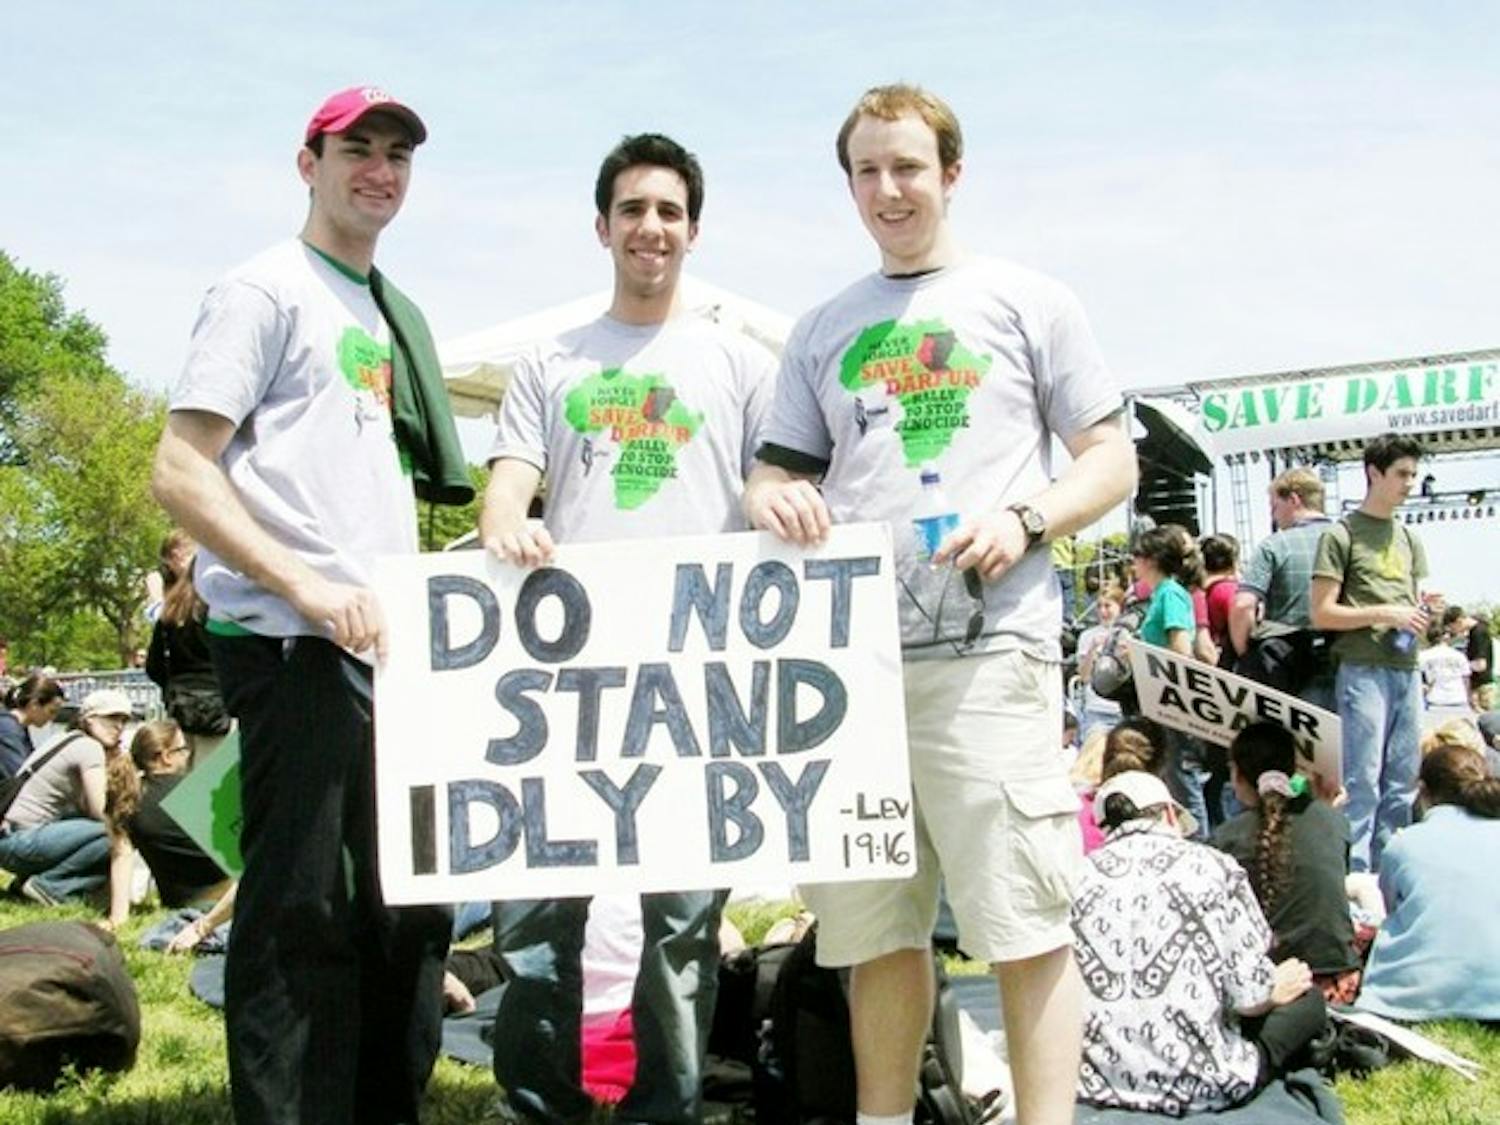 Chase Hogle '07, Adam Shpeen '07, and Evan Michals '07 (l-r) attend a rally in Washington, D.C. for the victims of the Darfur genocide. The rally urged American intervention in the ongoing genocide.